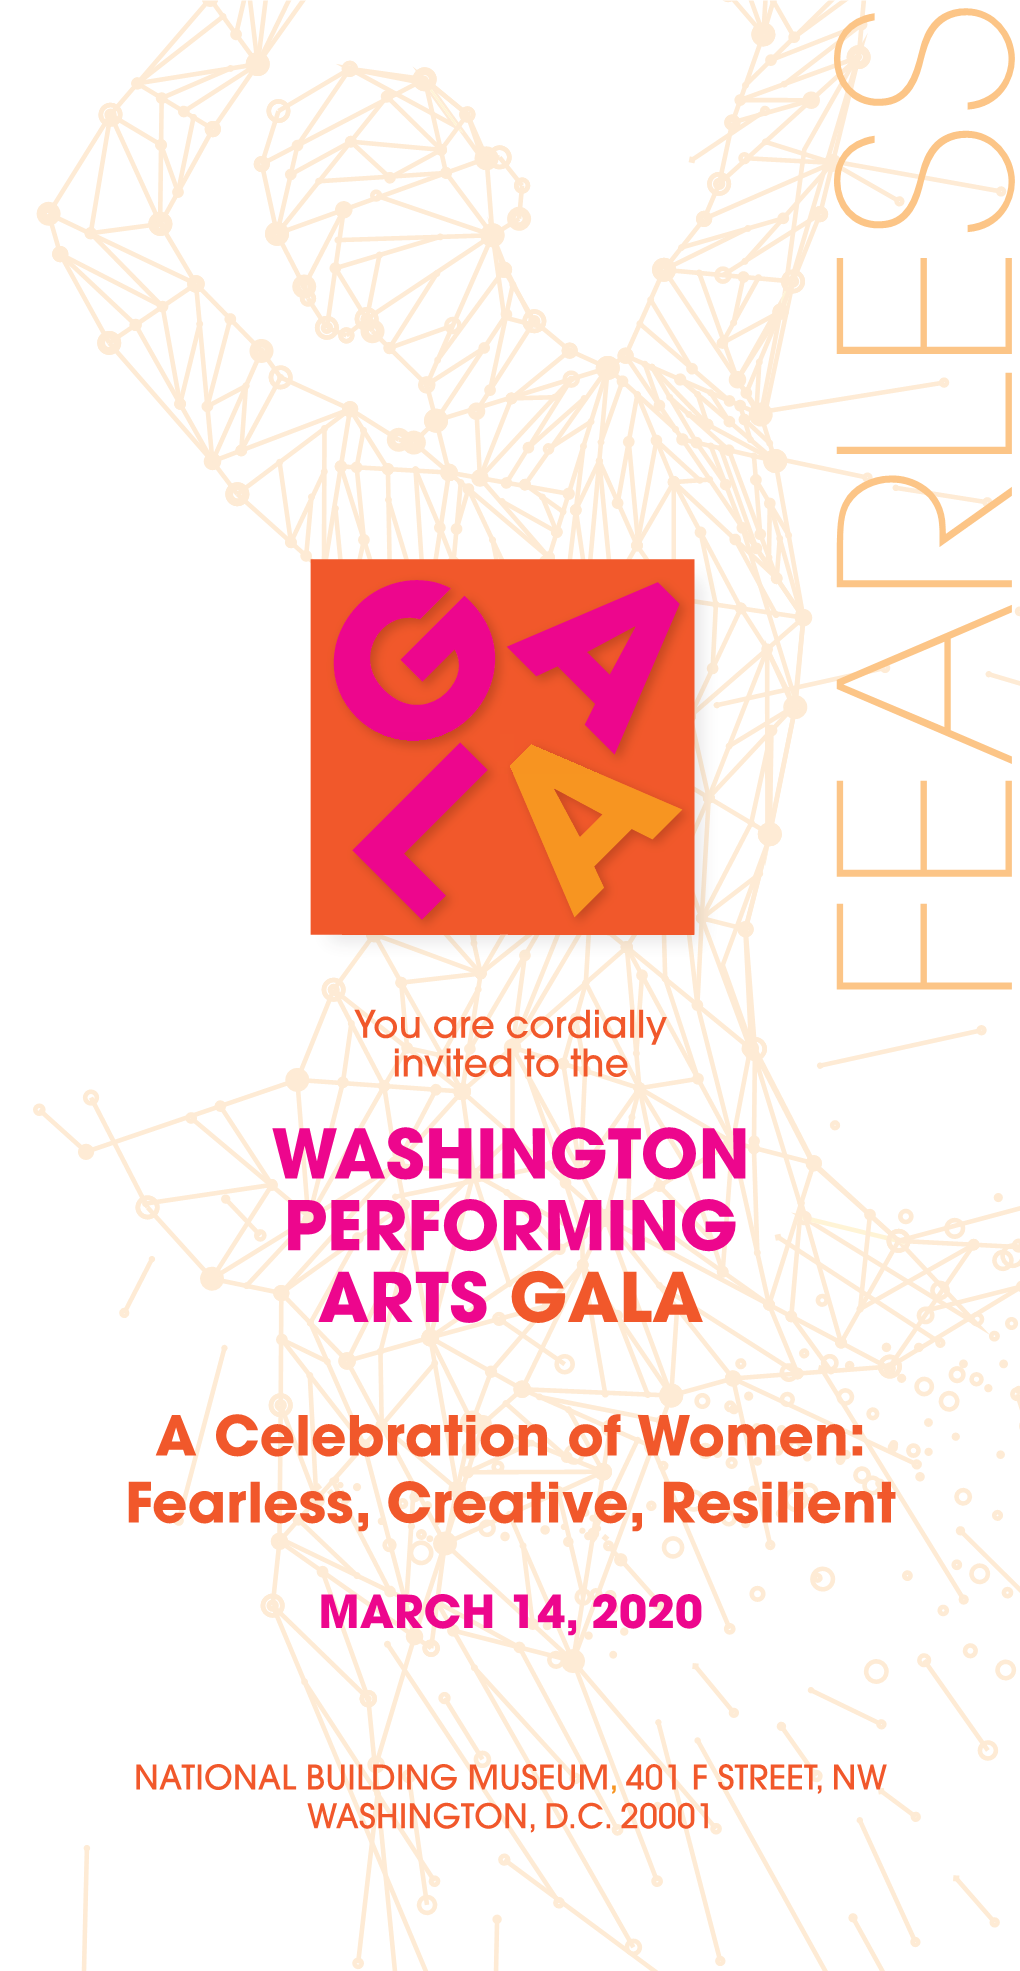 FEARLESS You Are Cordially Invited to the WASHINGTON PERFORMING ARTS GALA